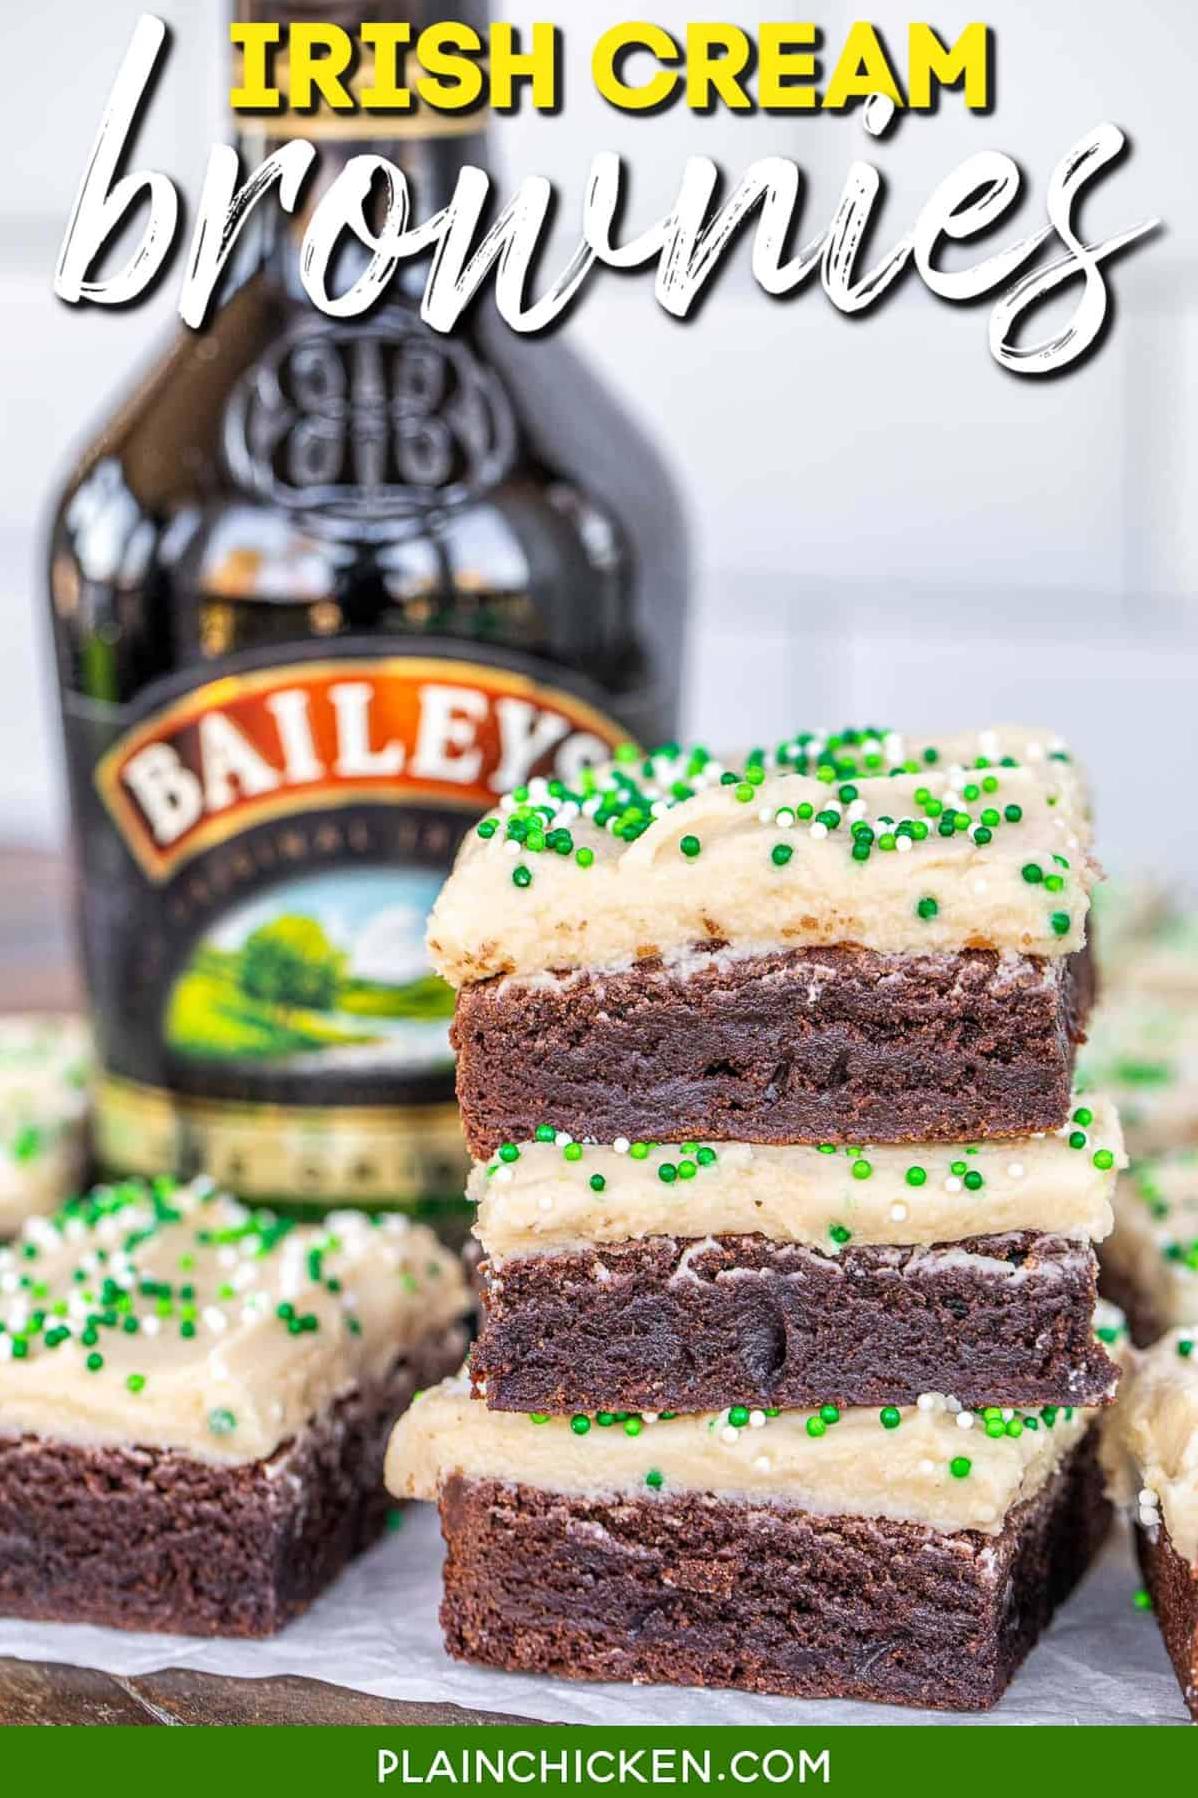  Rich chocolate meets smooth Irish cream frosting in every bite!